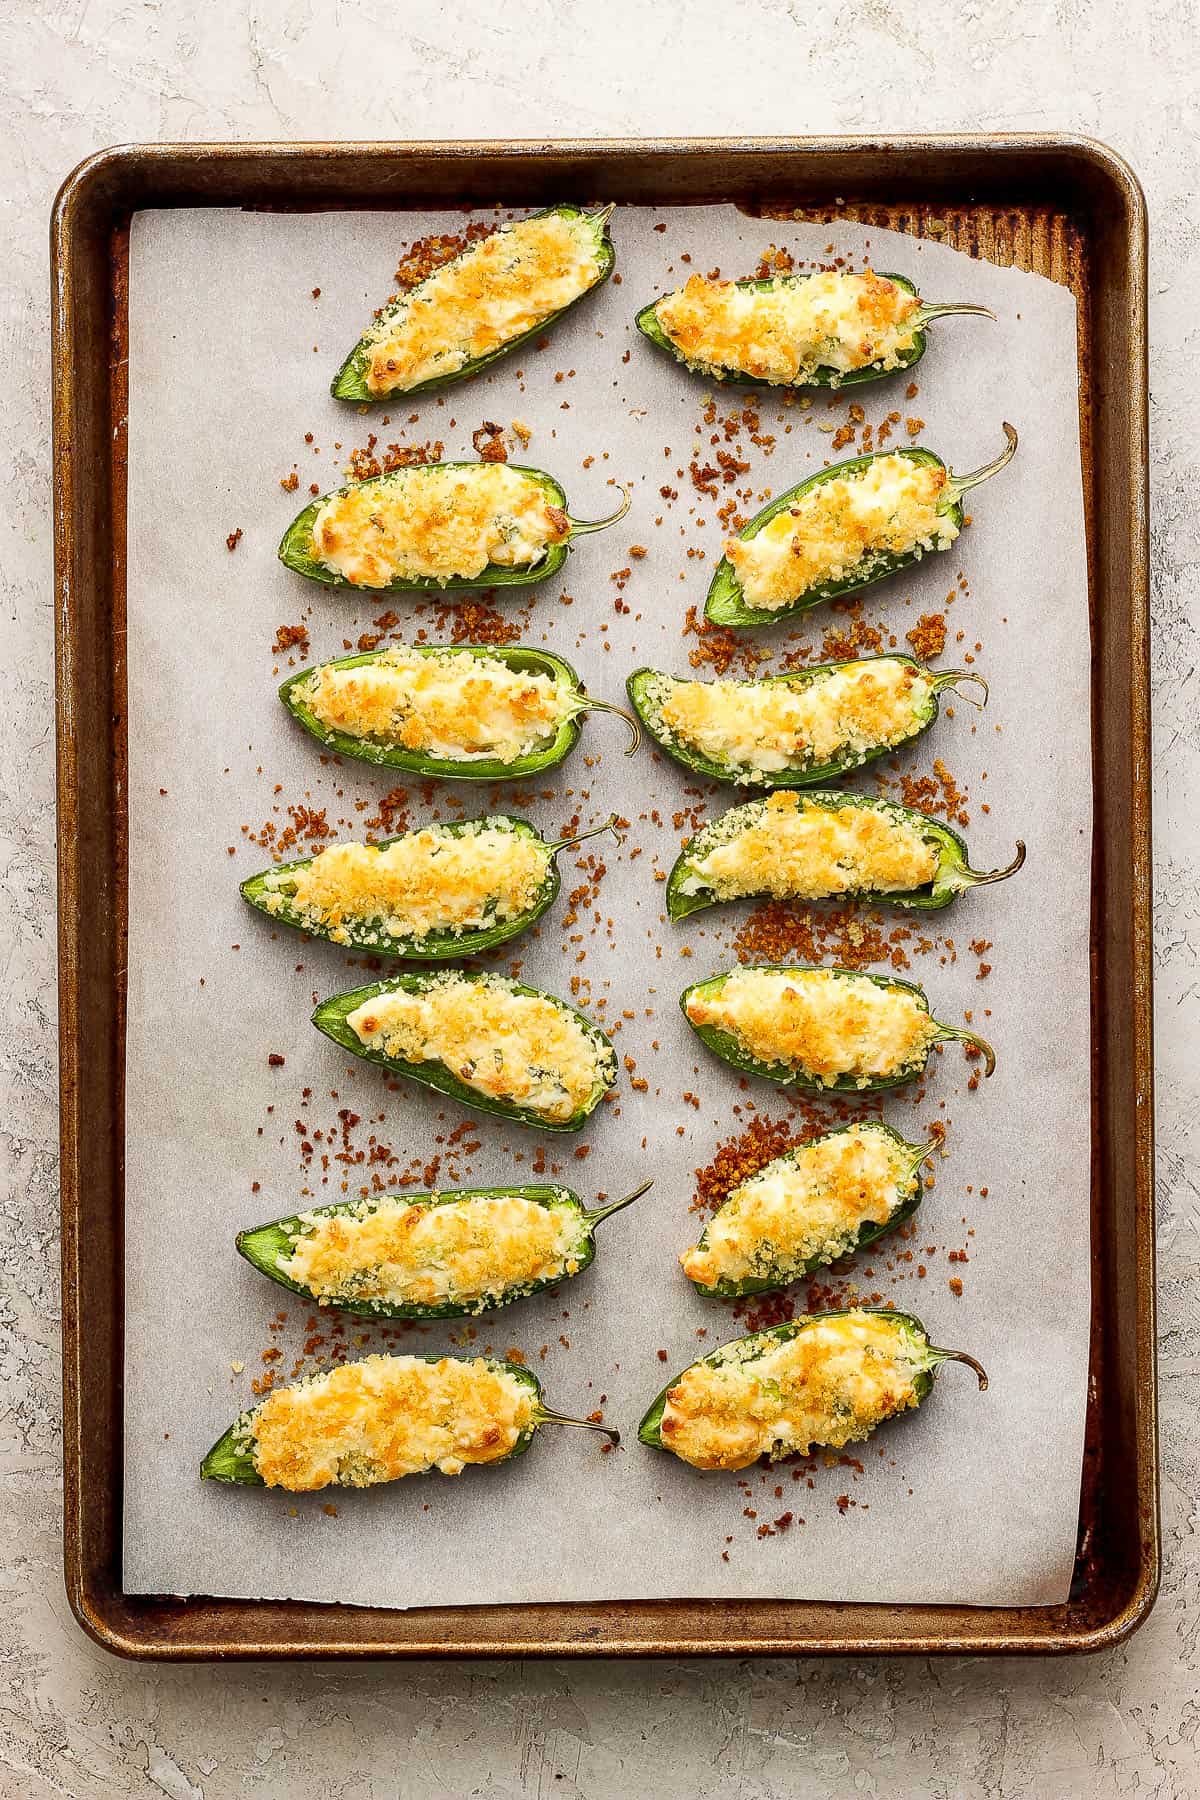 Baked and warm jalapeno poppers on a baking sheet ready to serve.